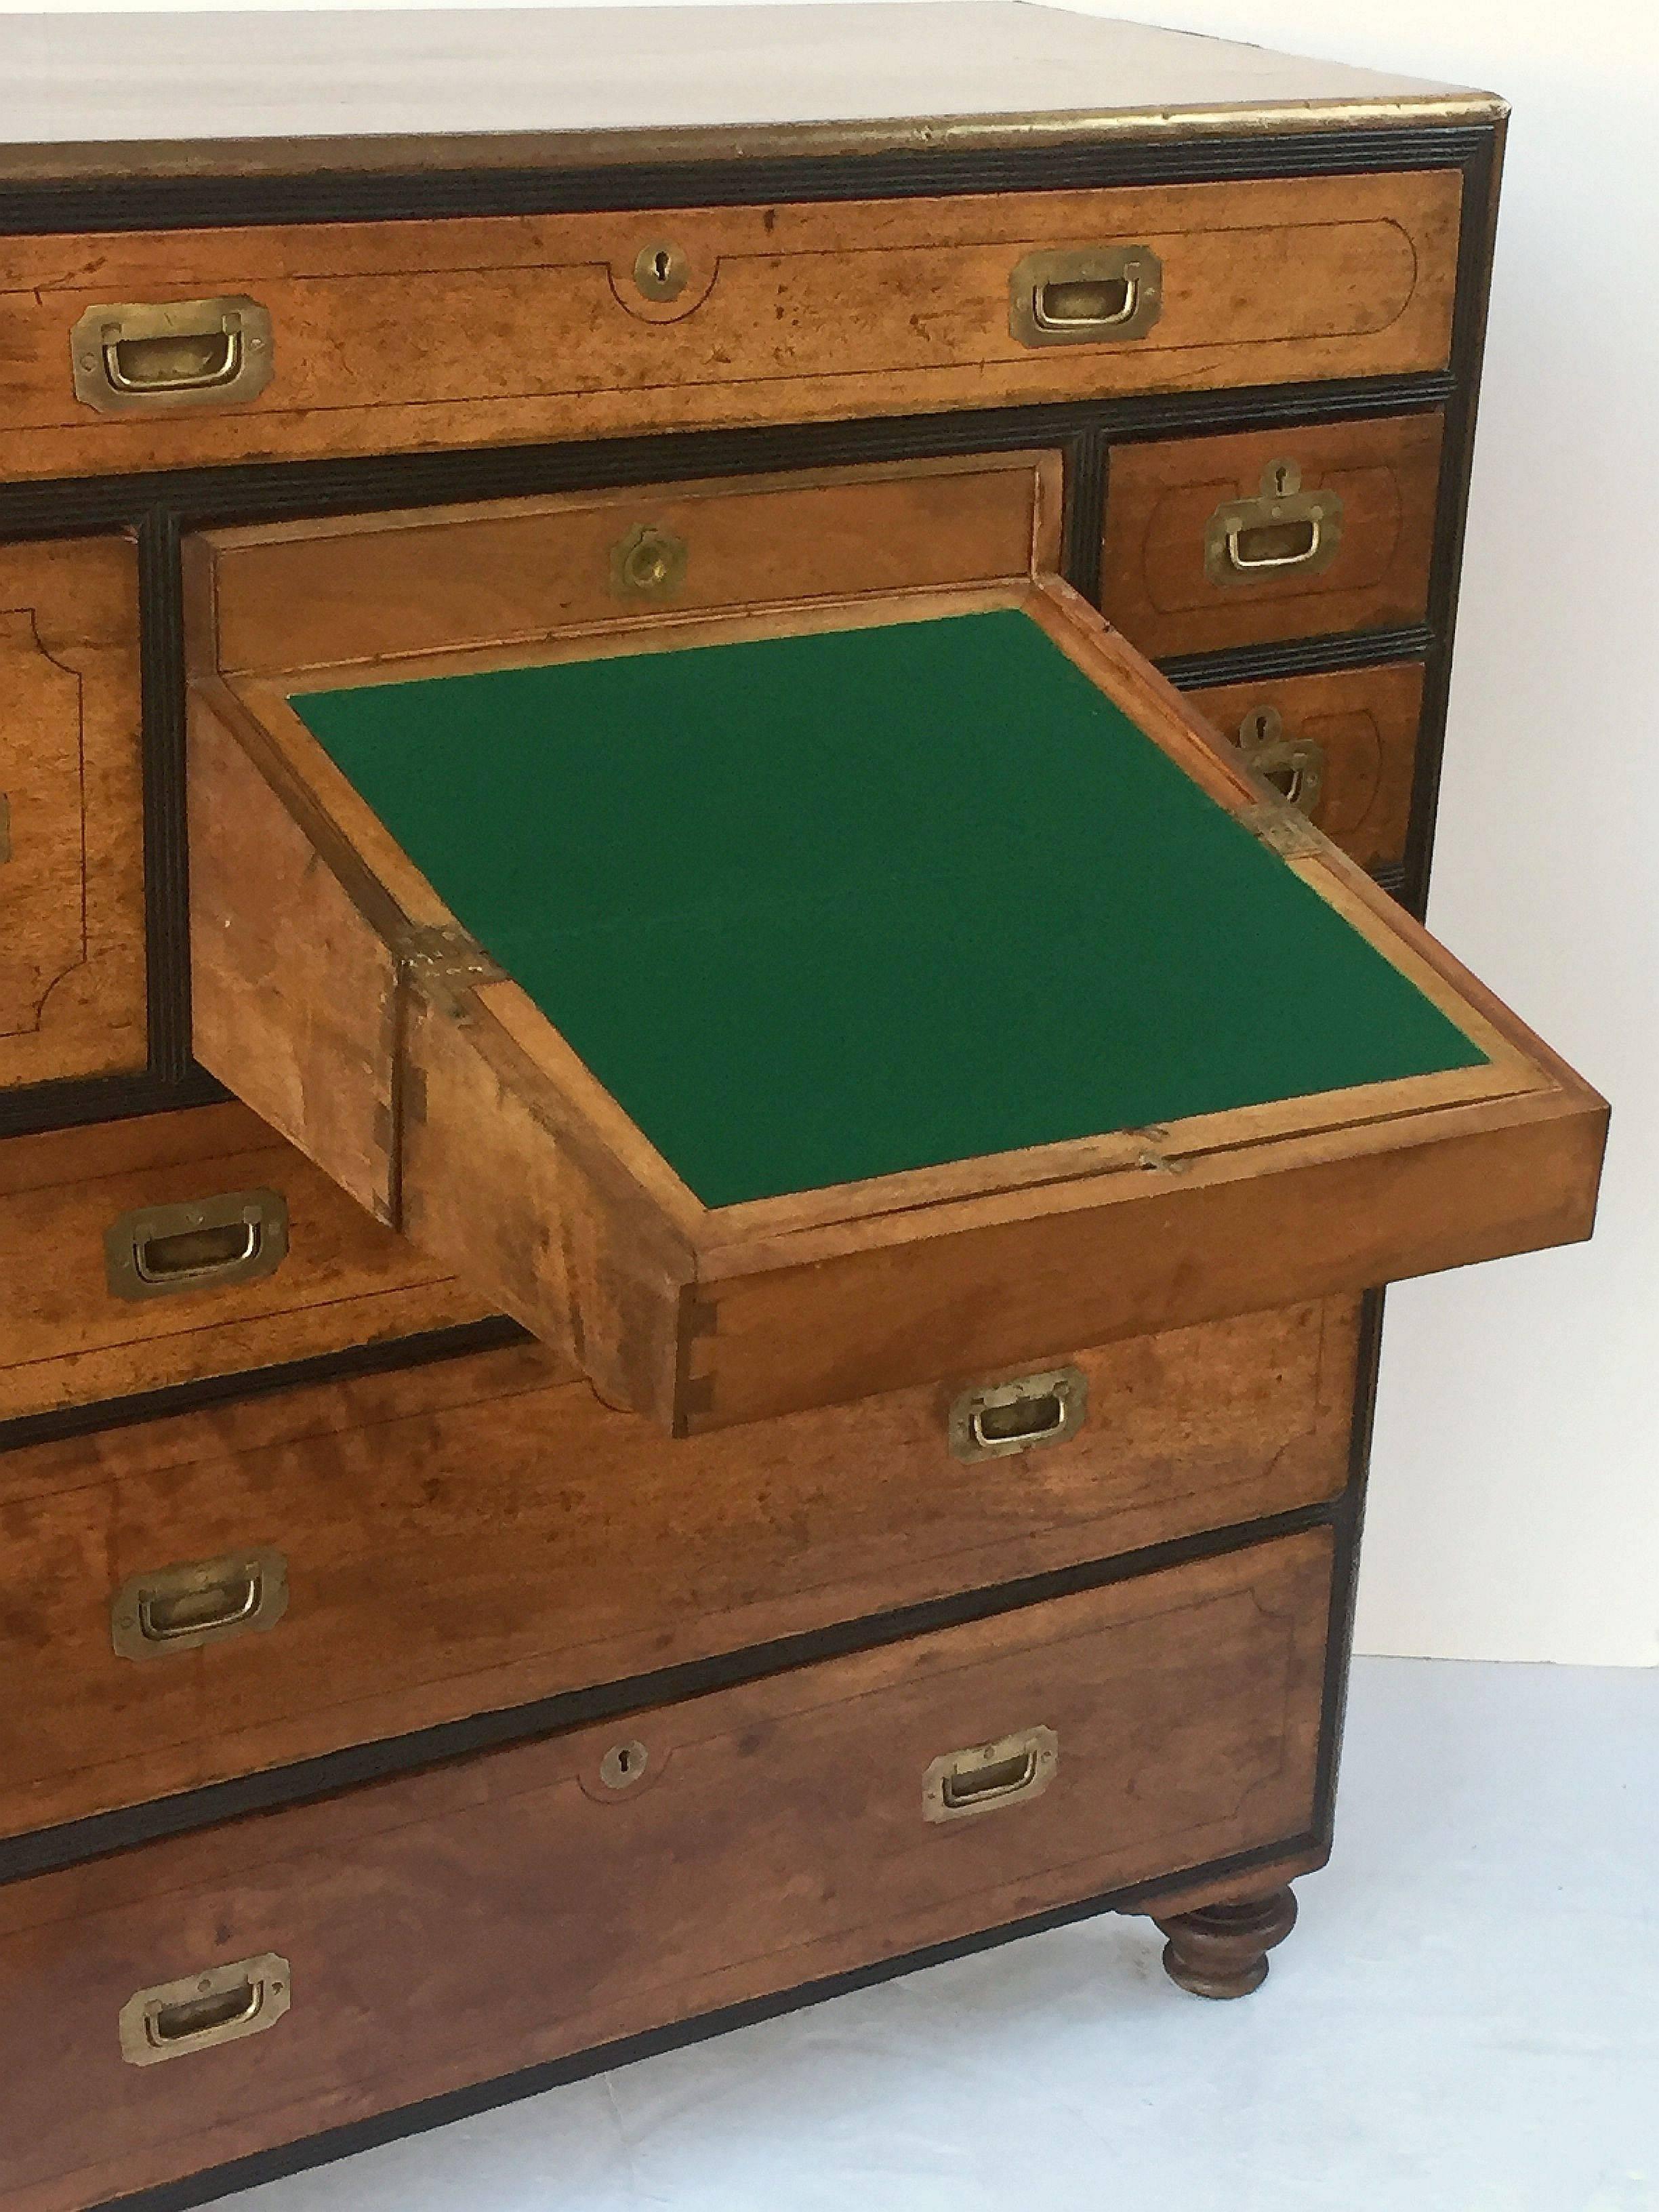 19th Century British Military Officer's Campaign Chest Secretary of Brass-Bound Camphor Wood